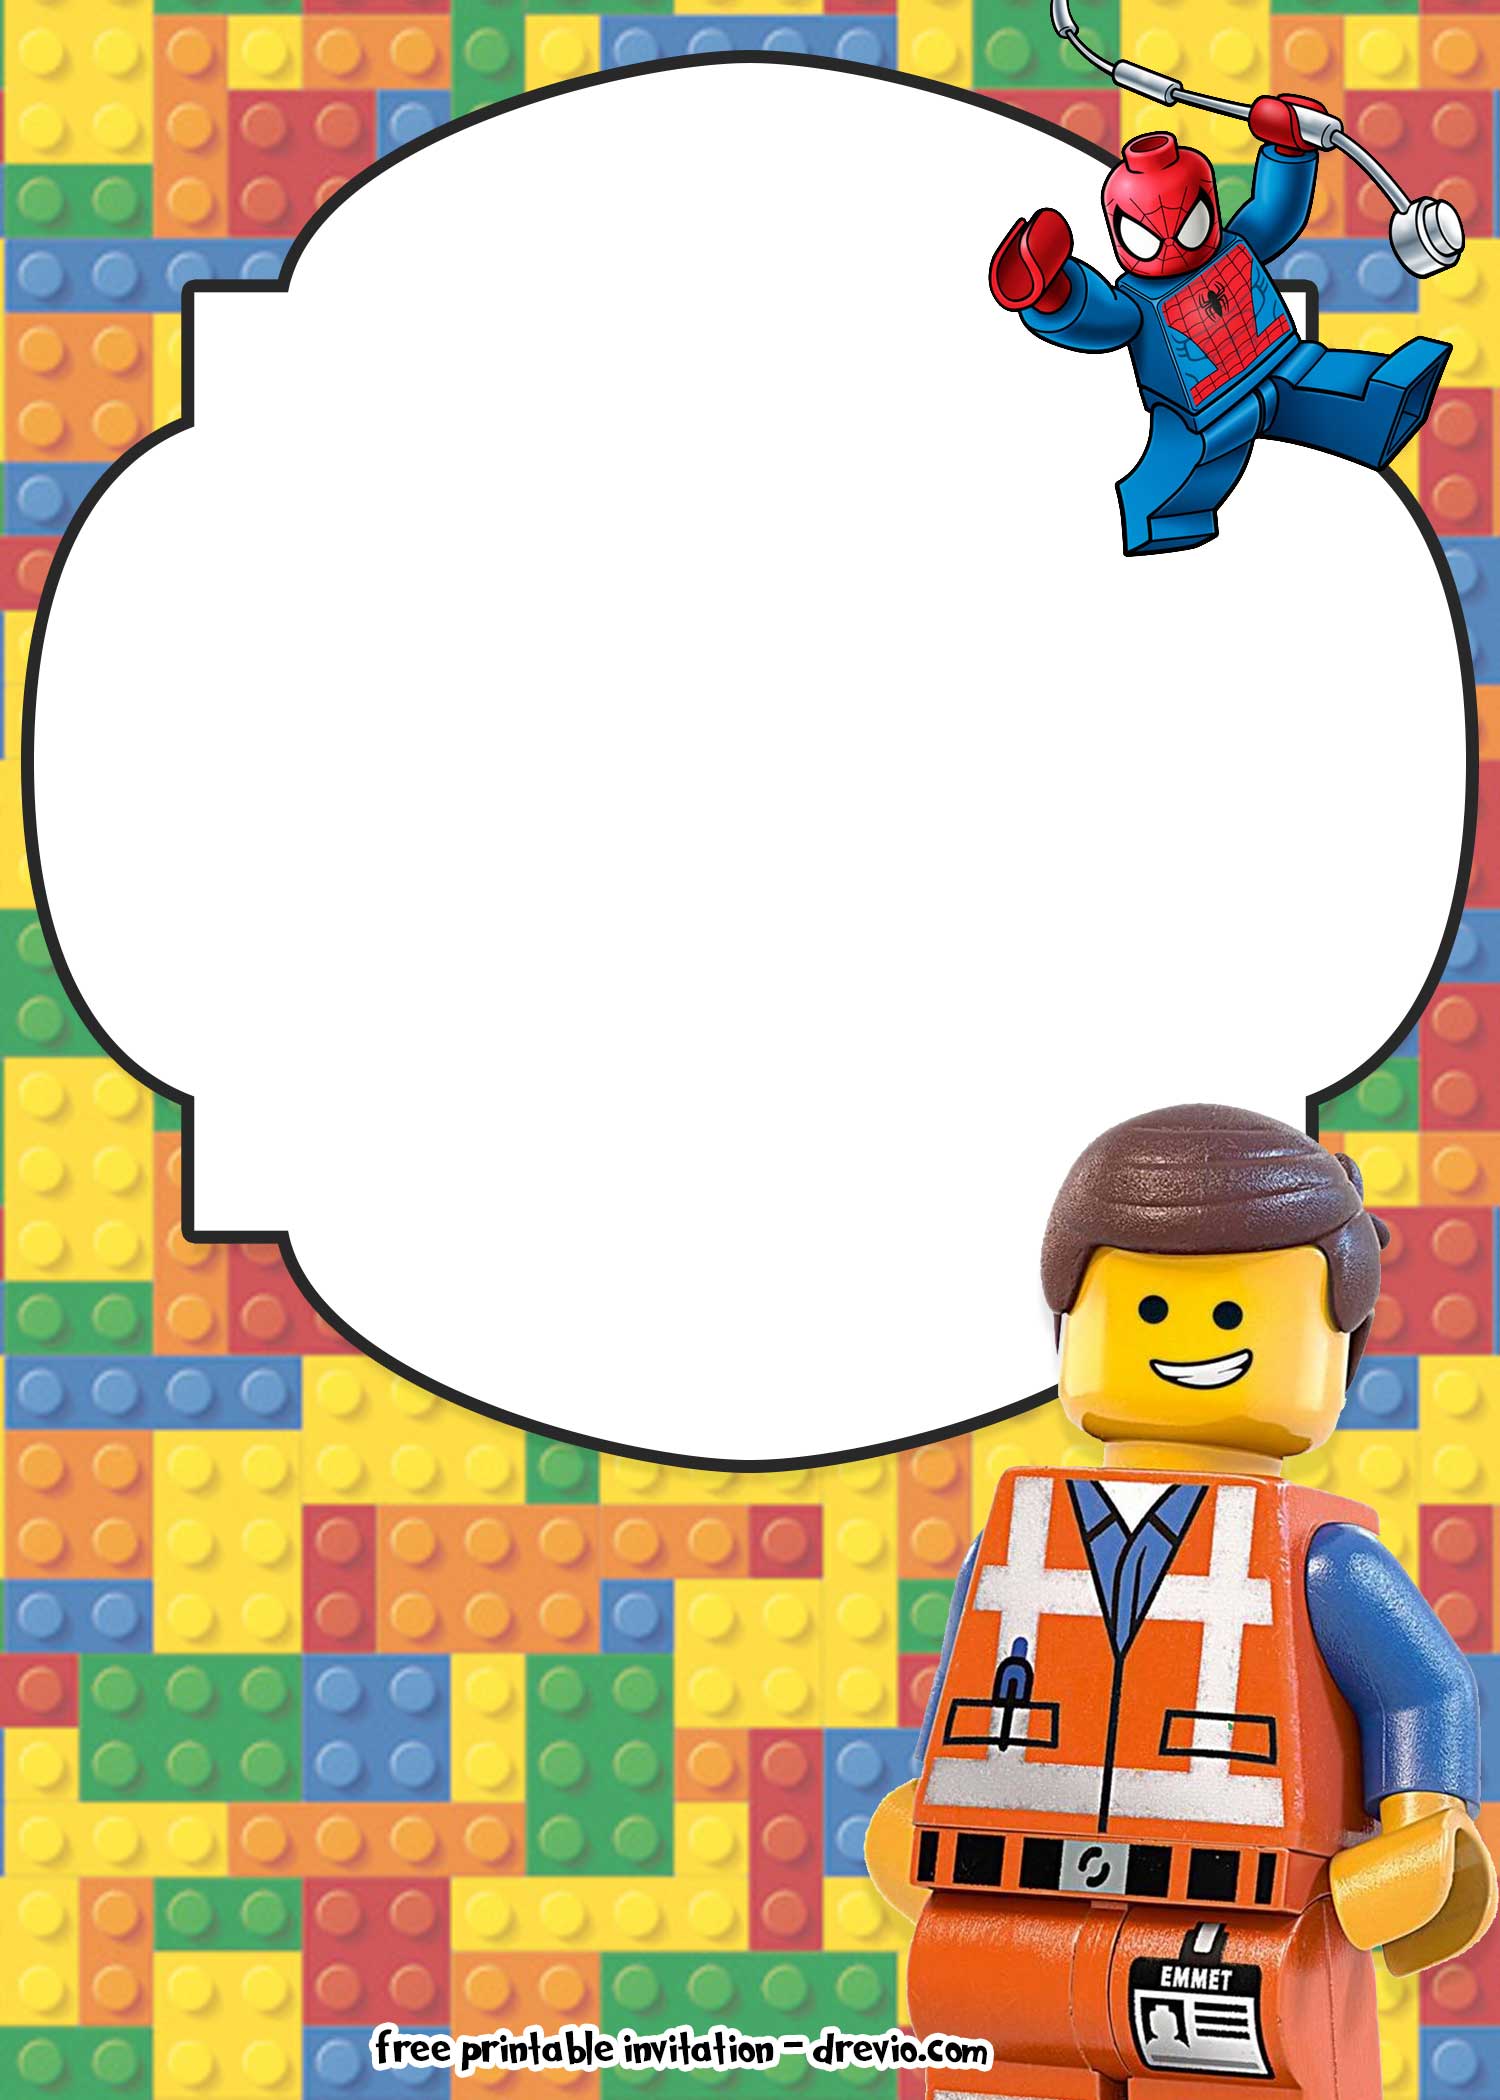 FREE LEGO Movie Invitations for Birthday Download Hundreds FREE